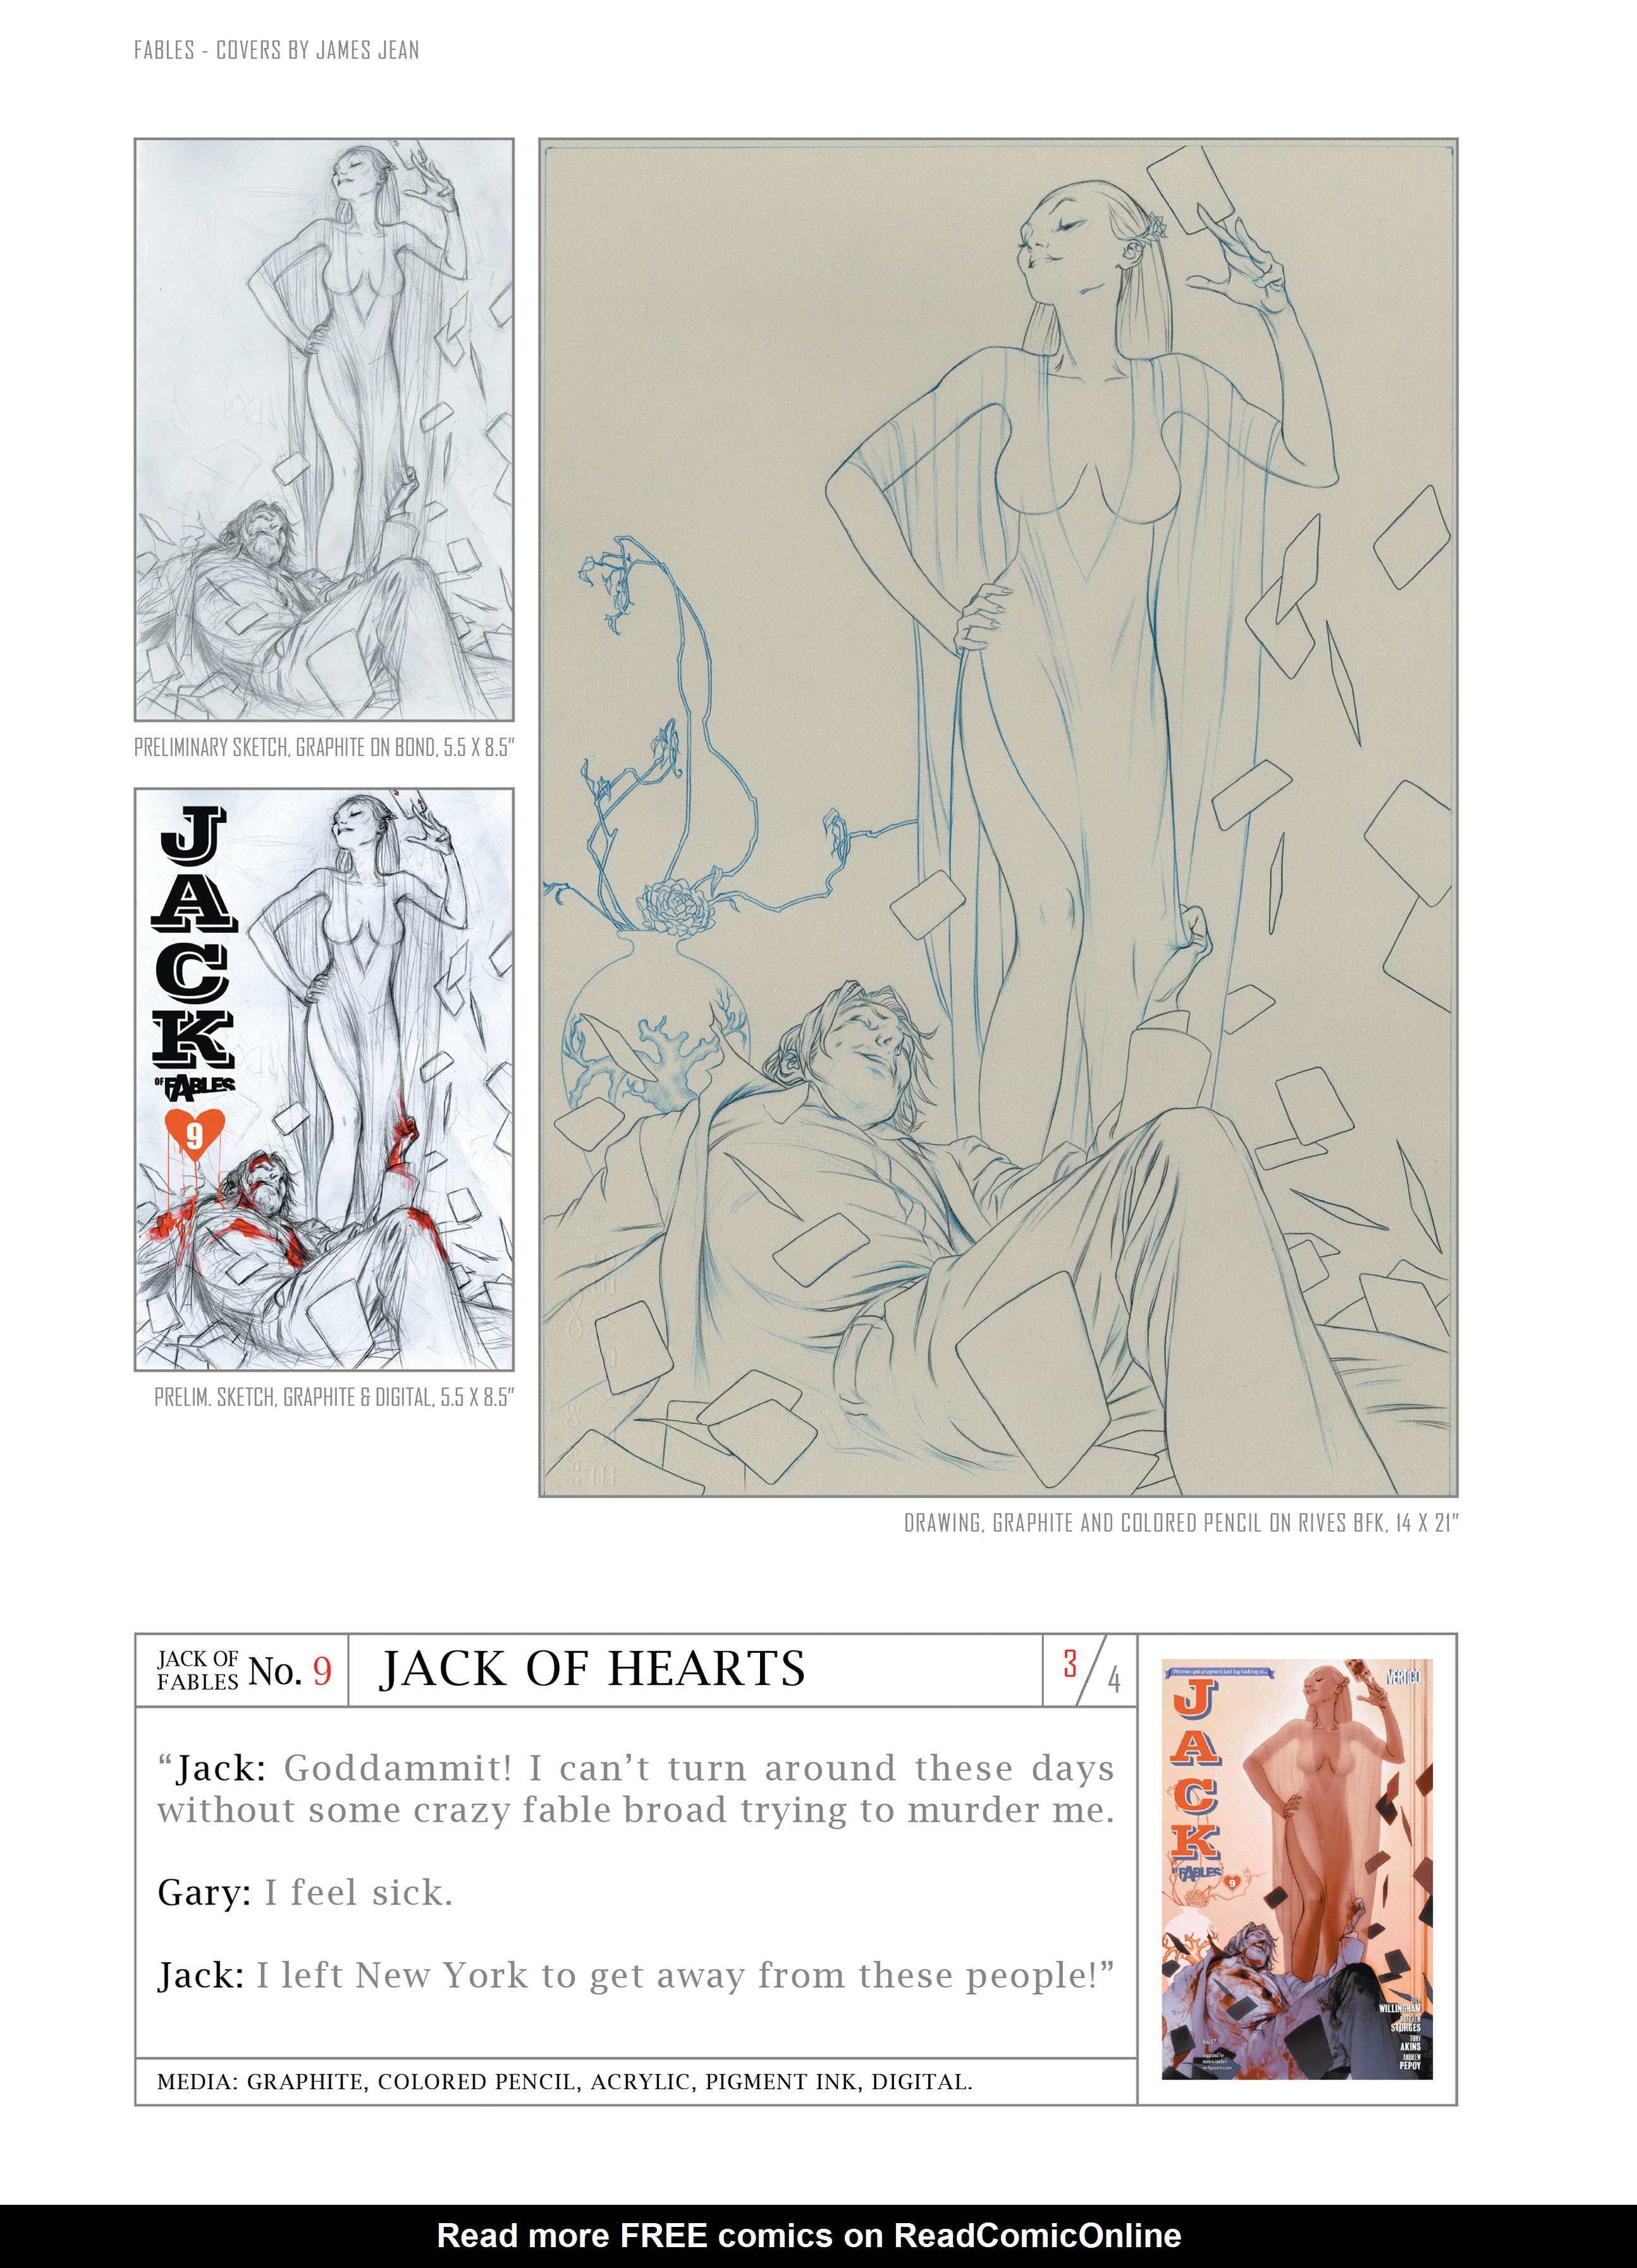 Read online Fables: Covers by James Jean comic -  Issue # TPB (Part 3) - 20